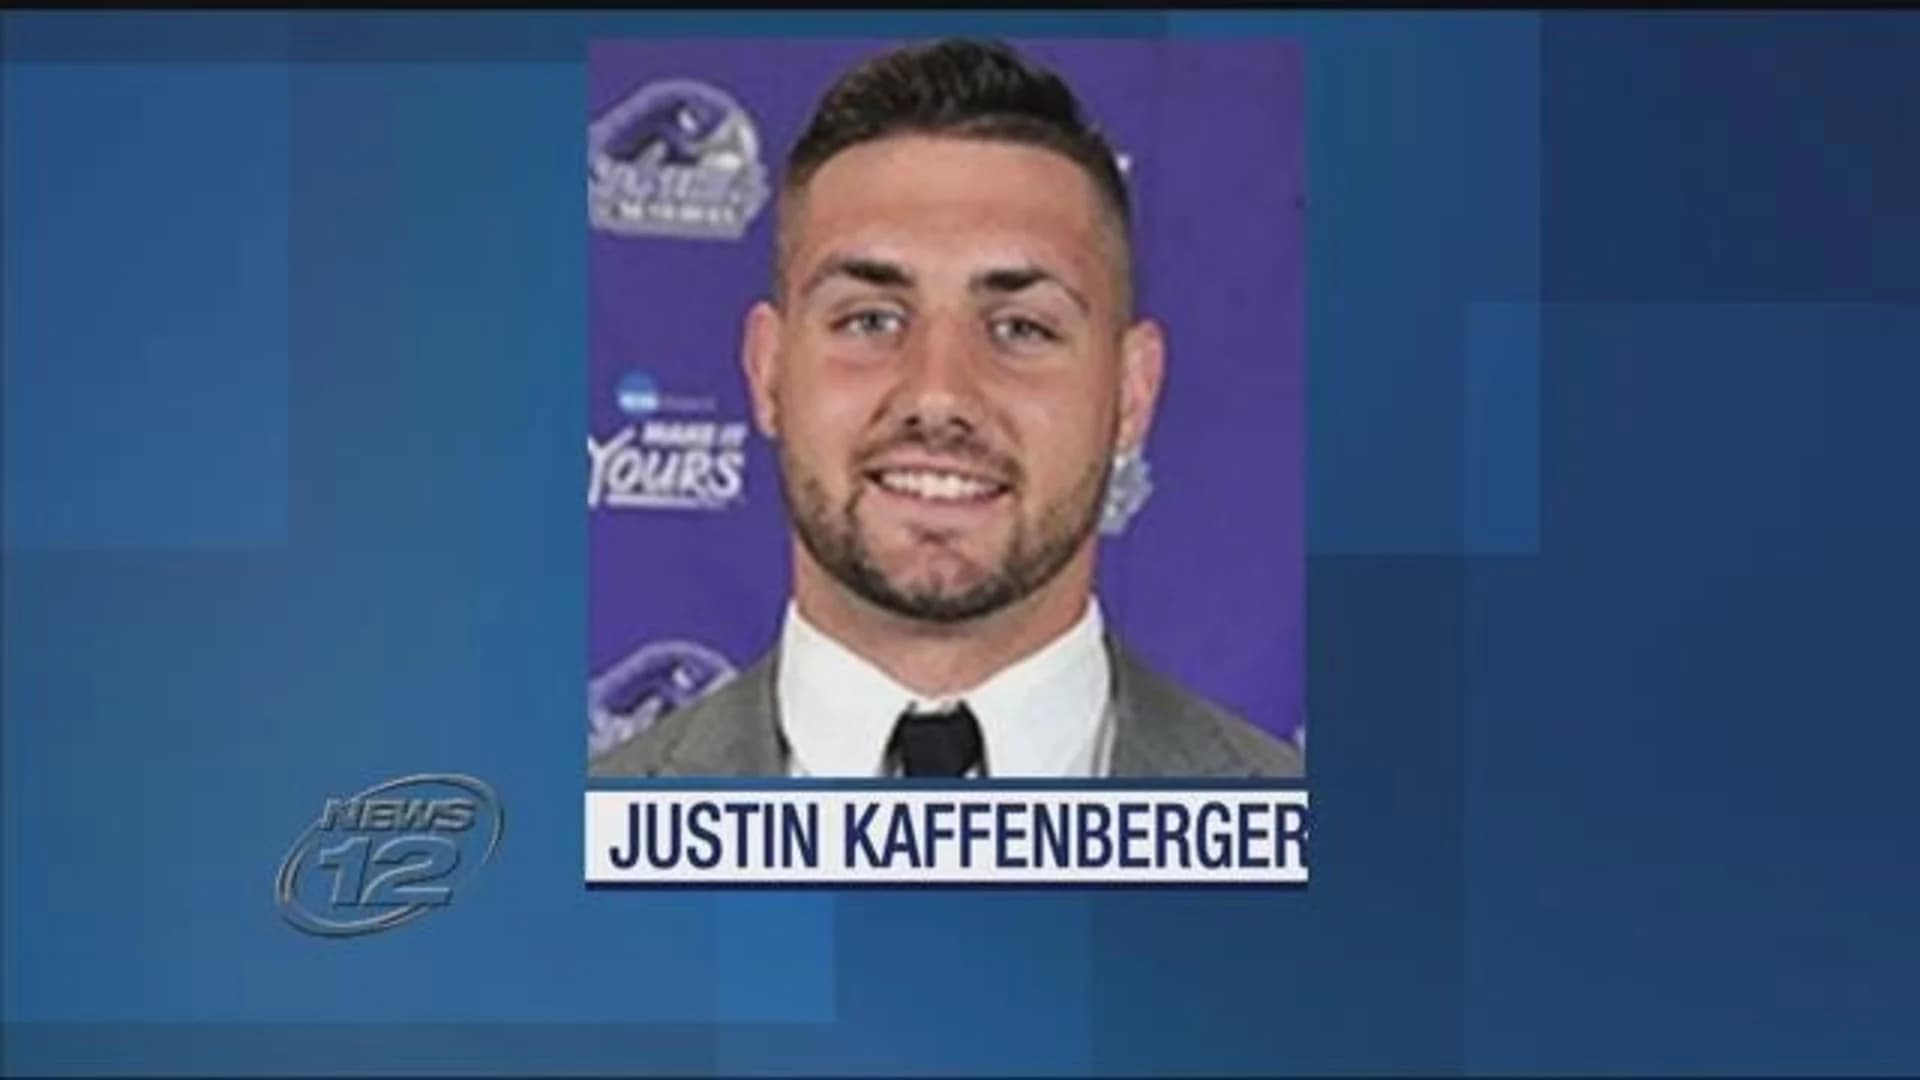 News 12's Most-Viewed: #11 - JV football coach accused of sending sexually explicit texts to minors